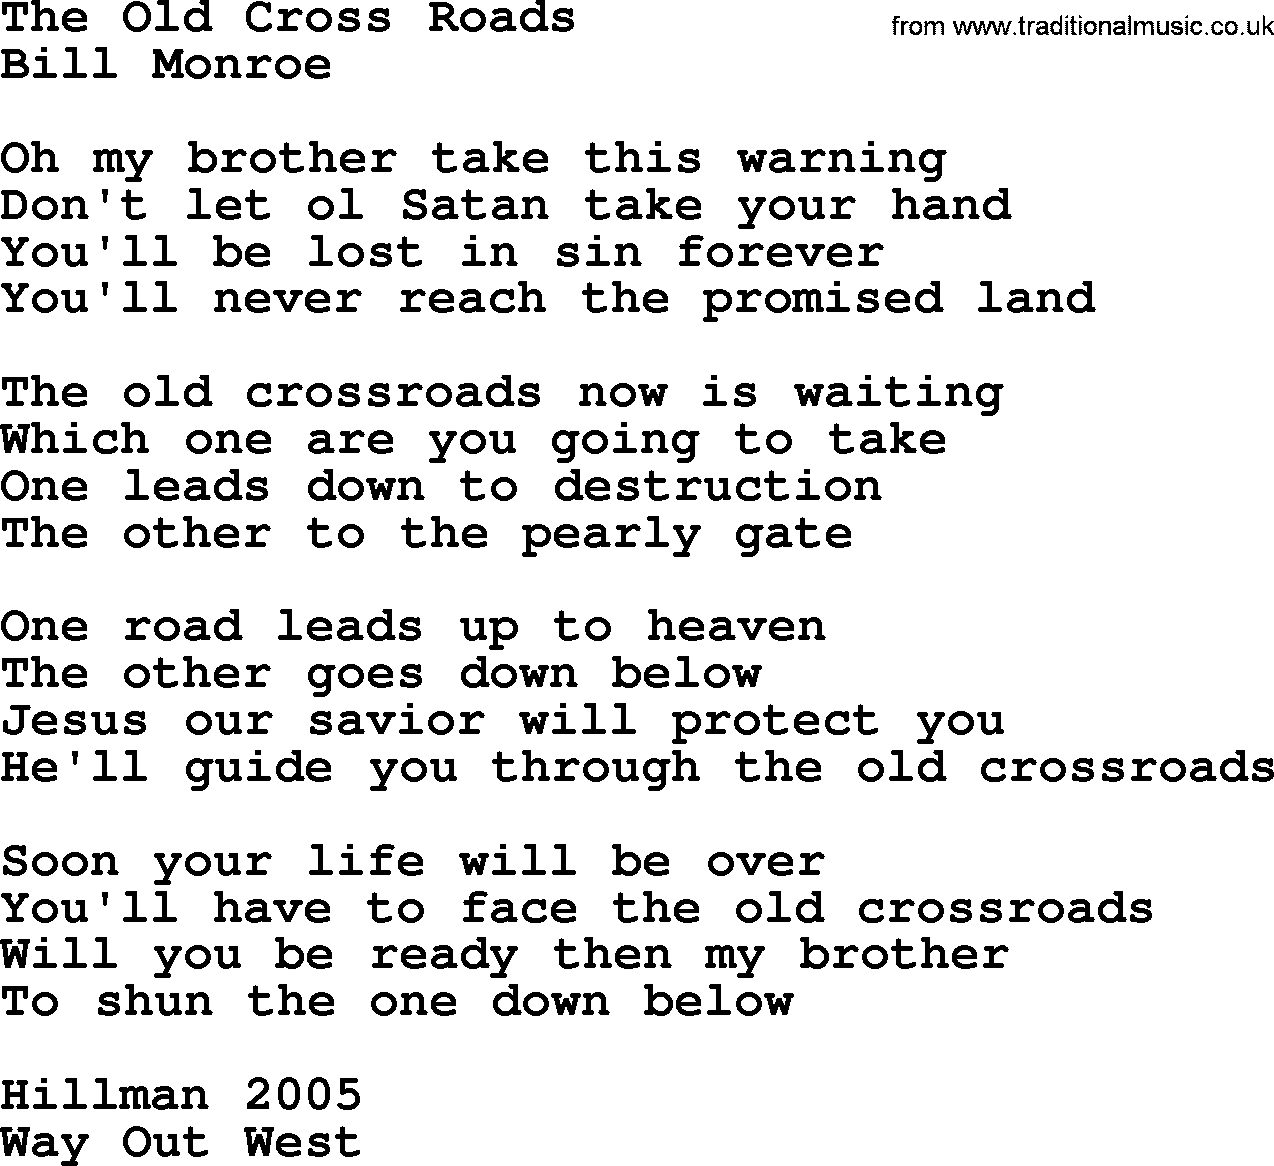 The Byrds song The Old Cross Roads, lyrics